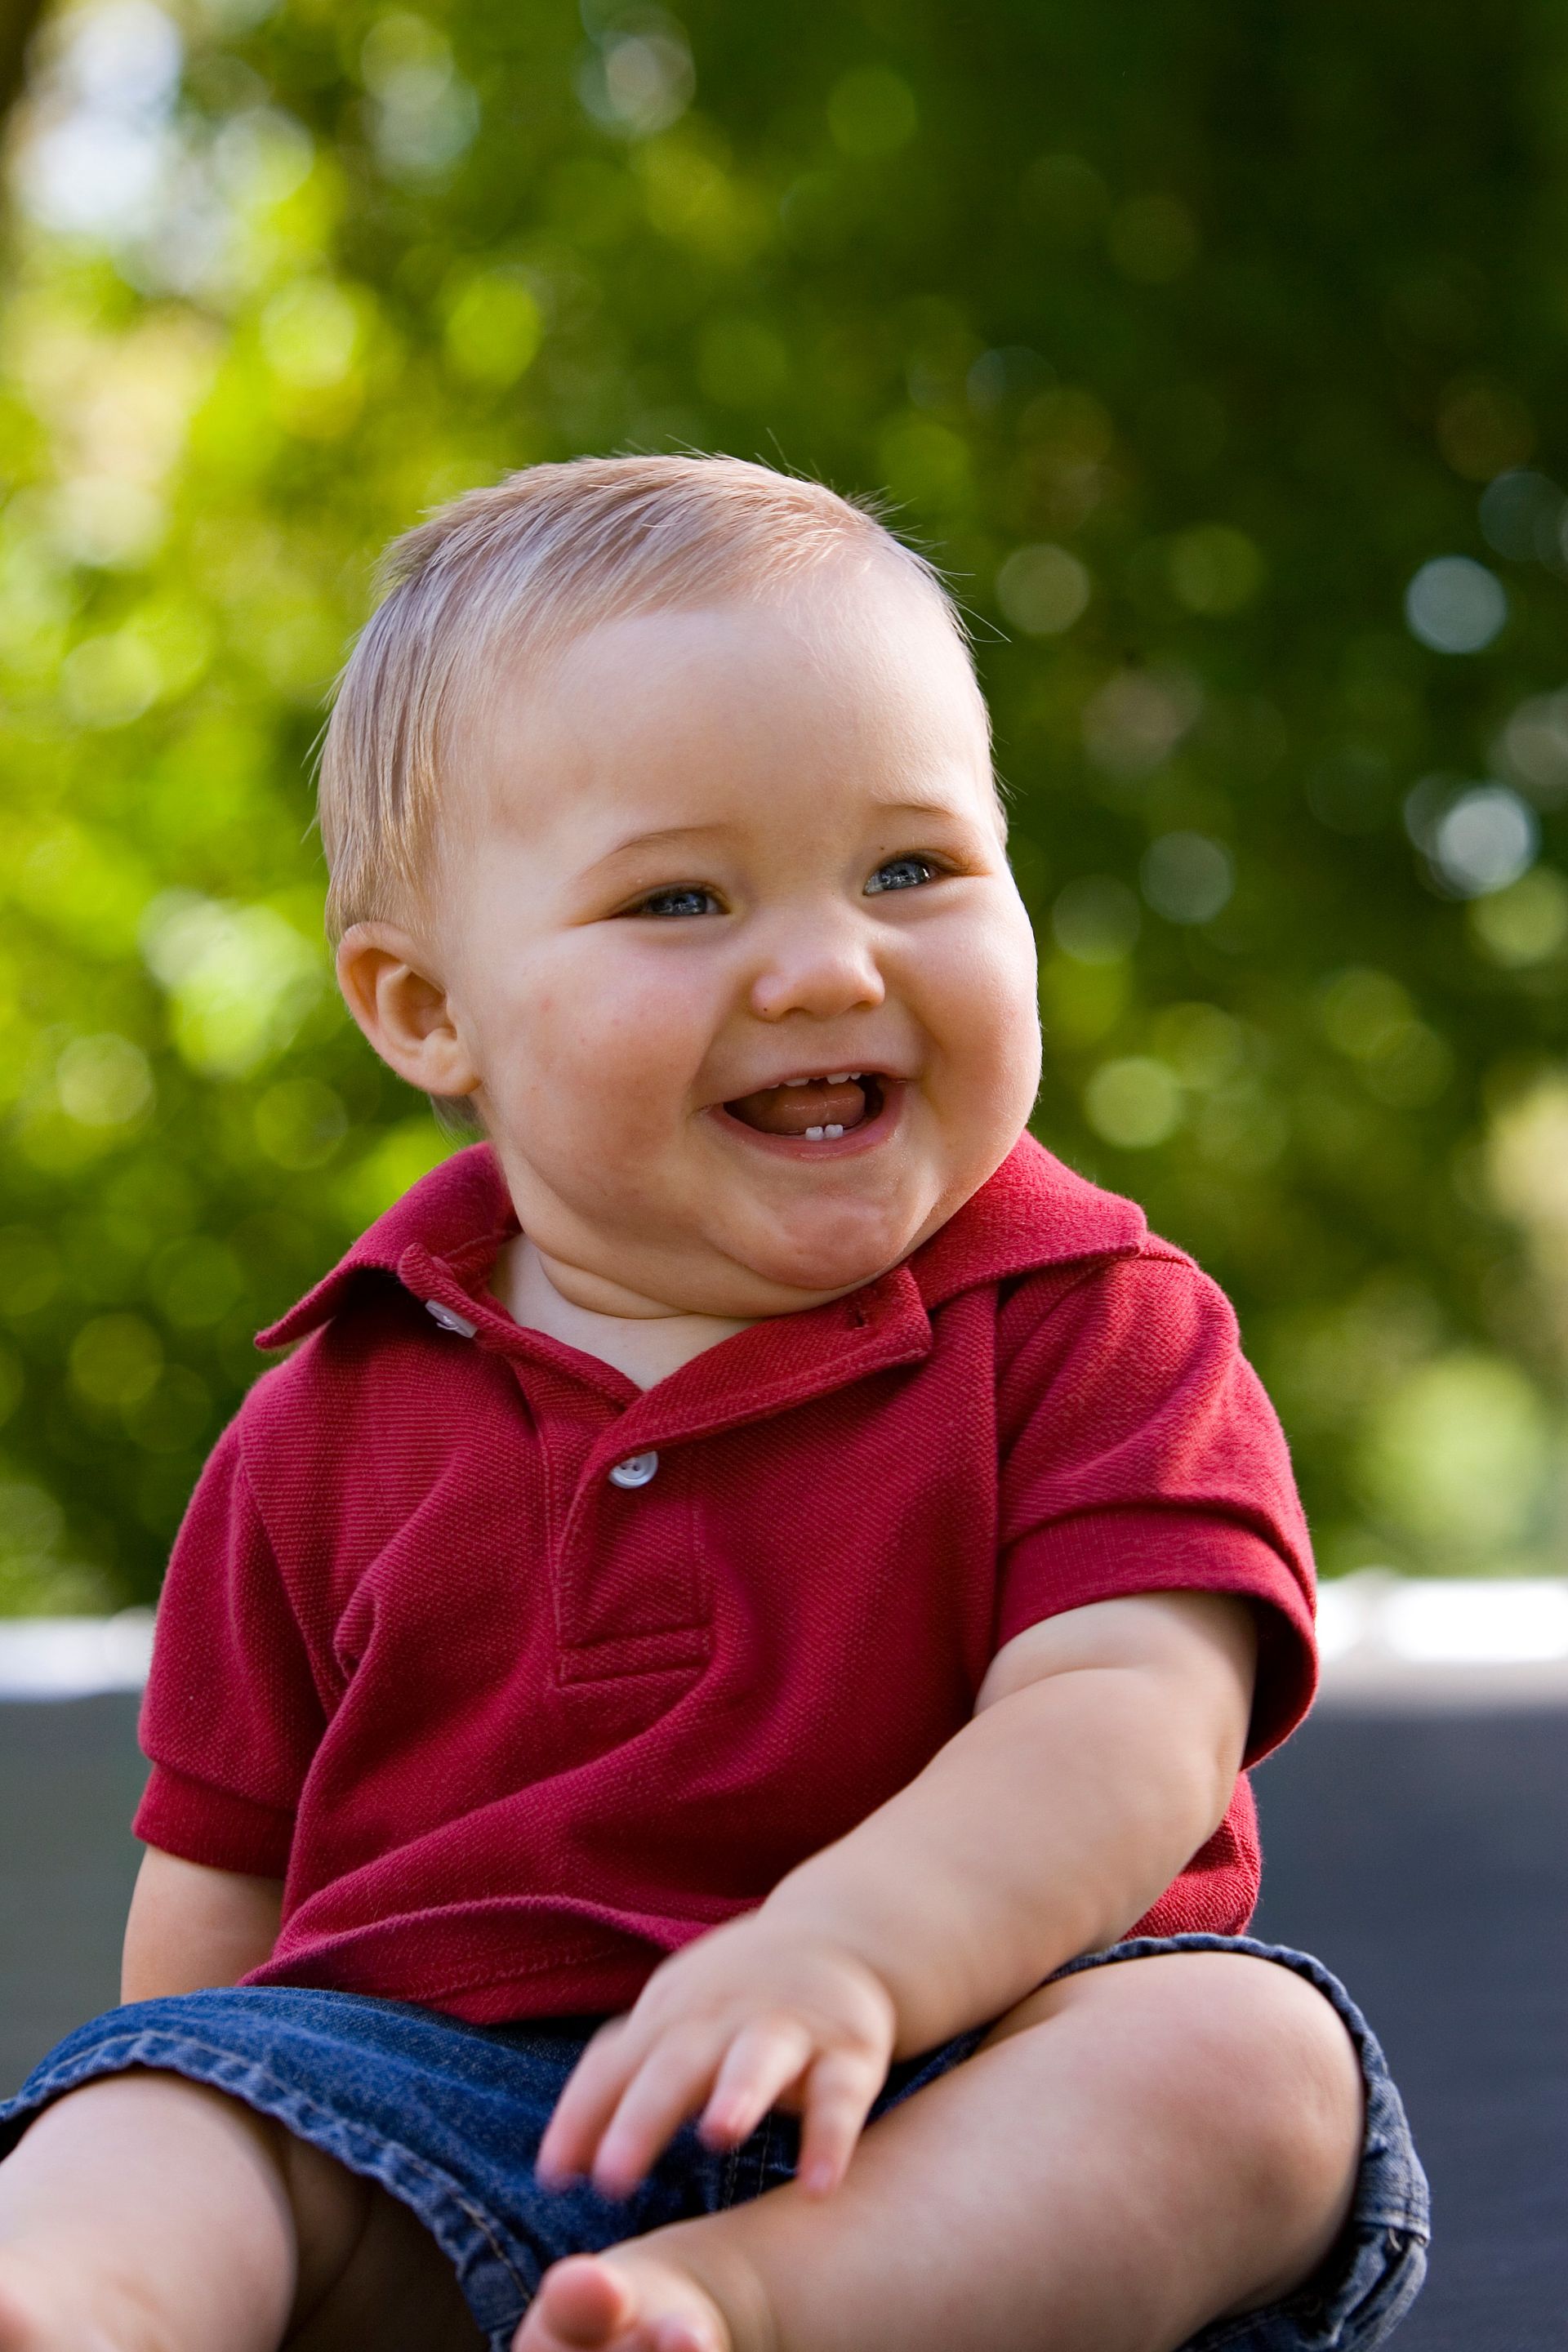 A portrait of a baby boy in a red shirt.